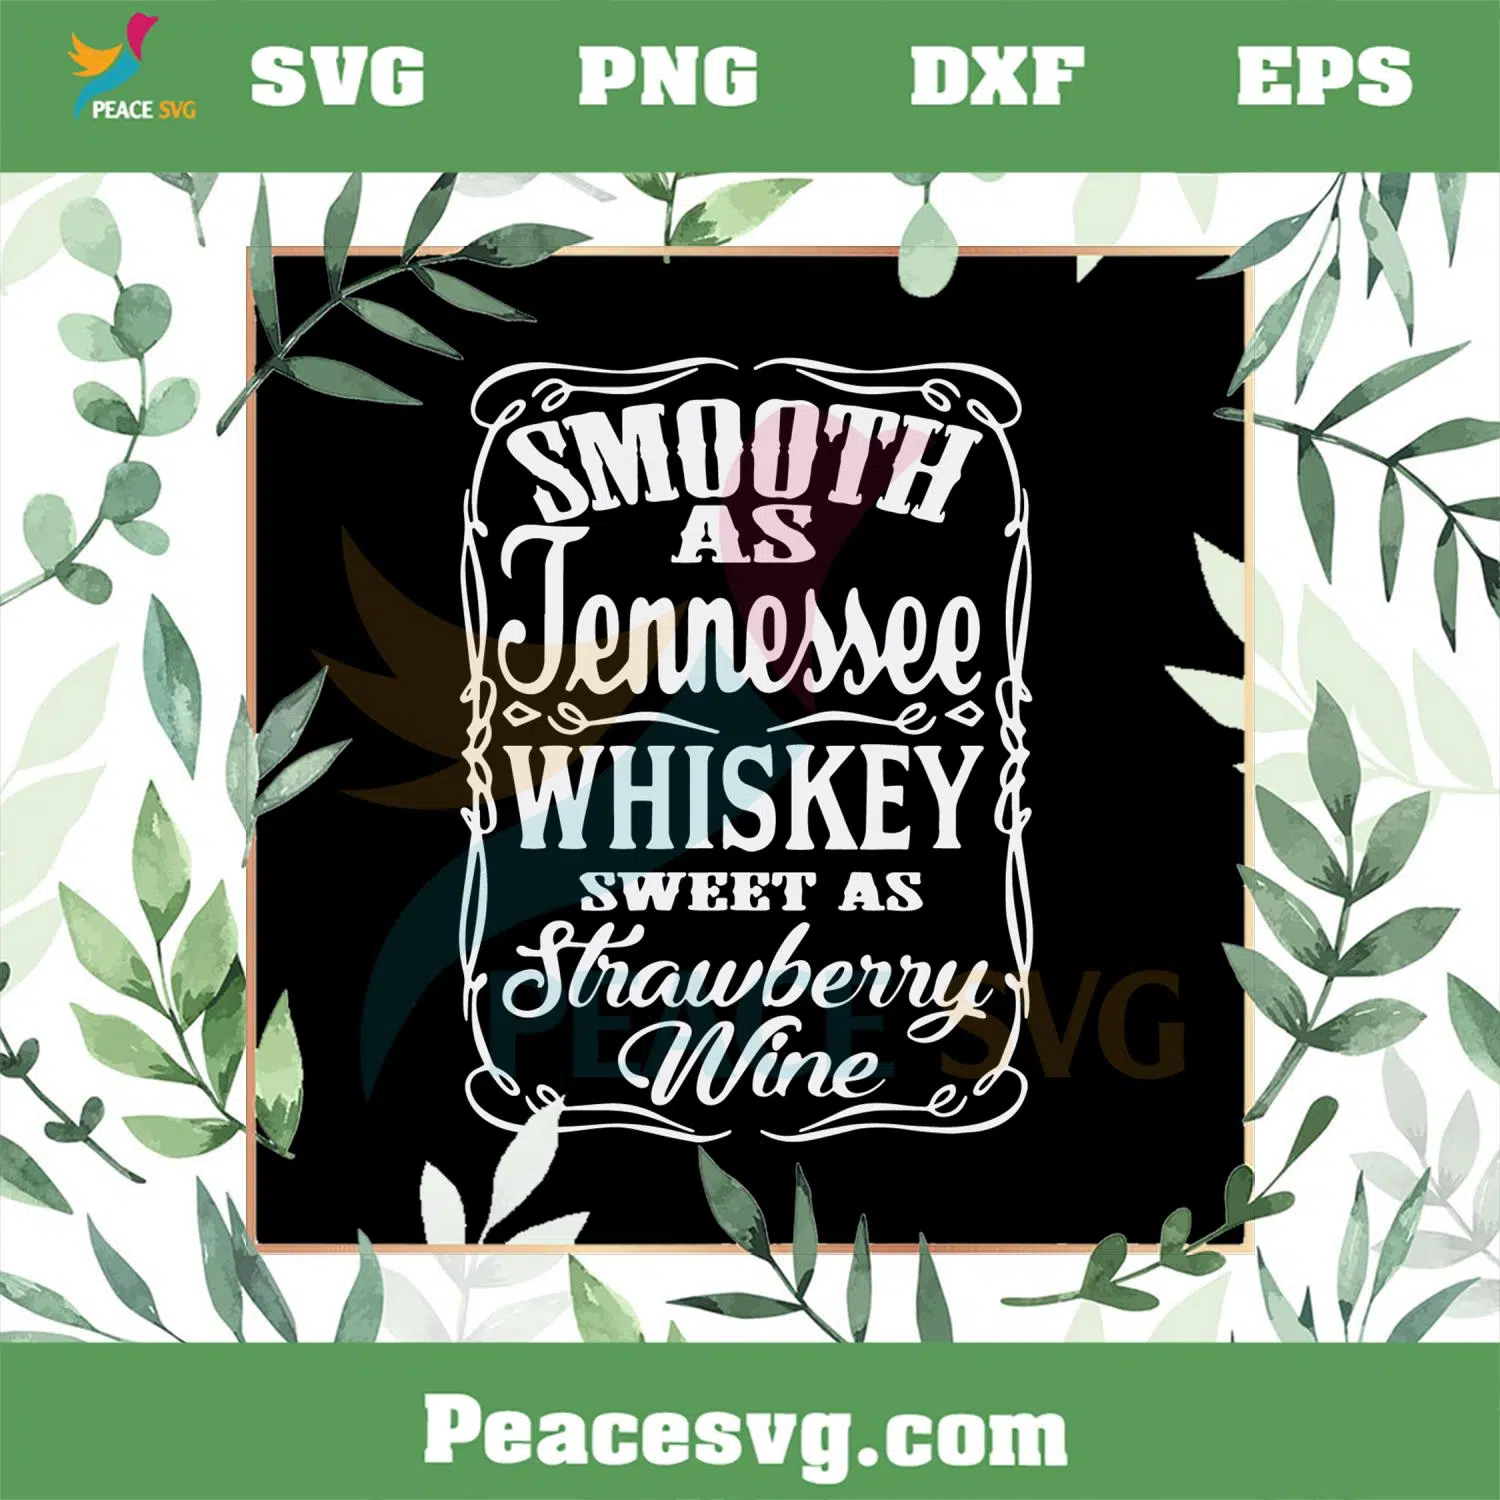 Smooth As Tennessee Whiskey Sweet As Strawberry Wine SVG Cutting Files